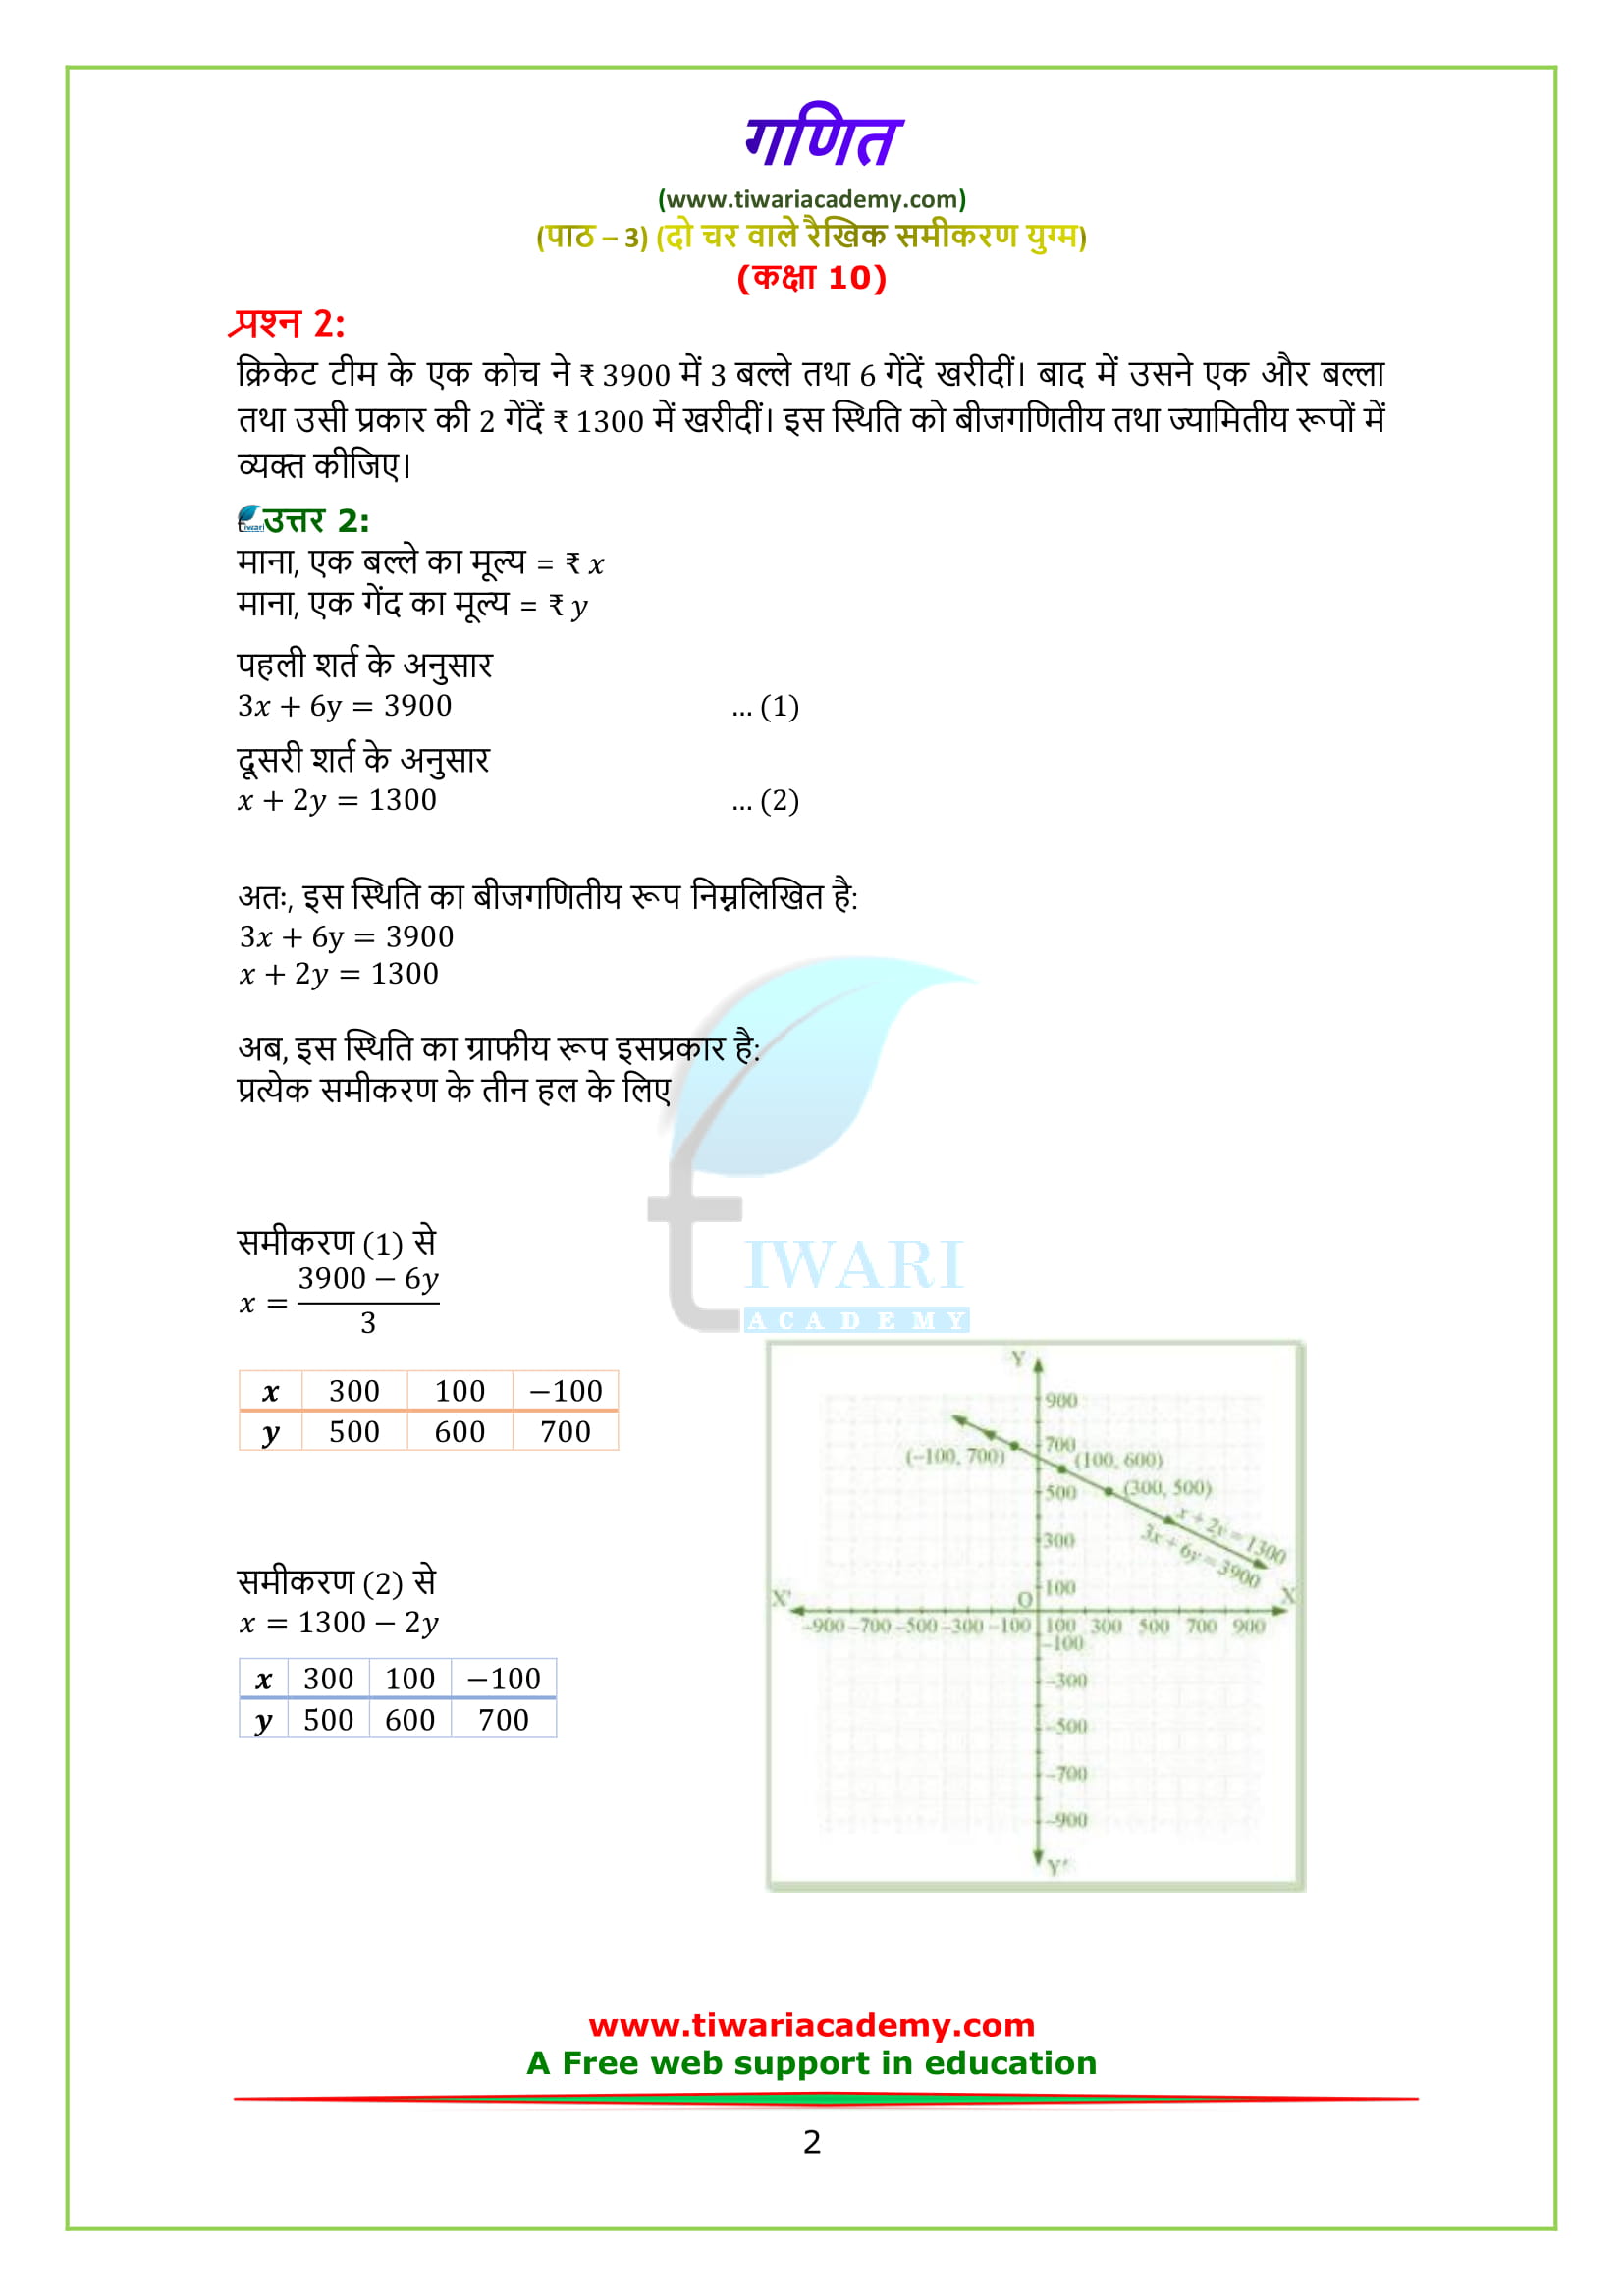 NCERT Solutions class 10 maths chapter 3 exercise 3.1 in Hindi medium PDF